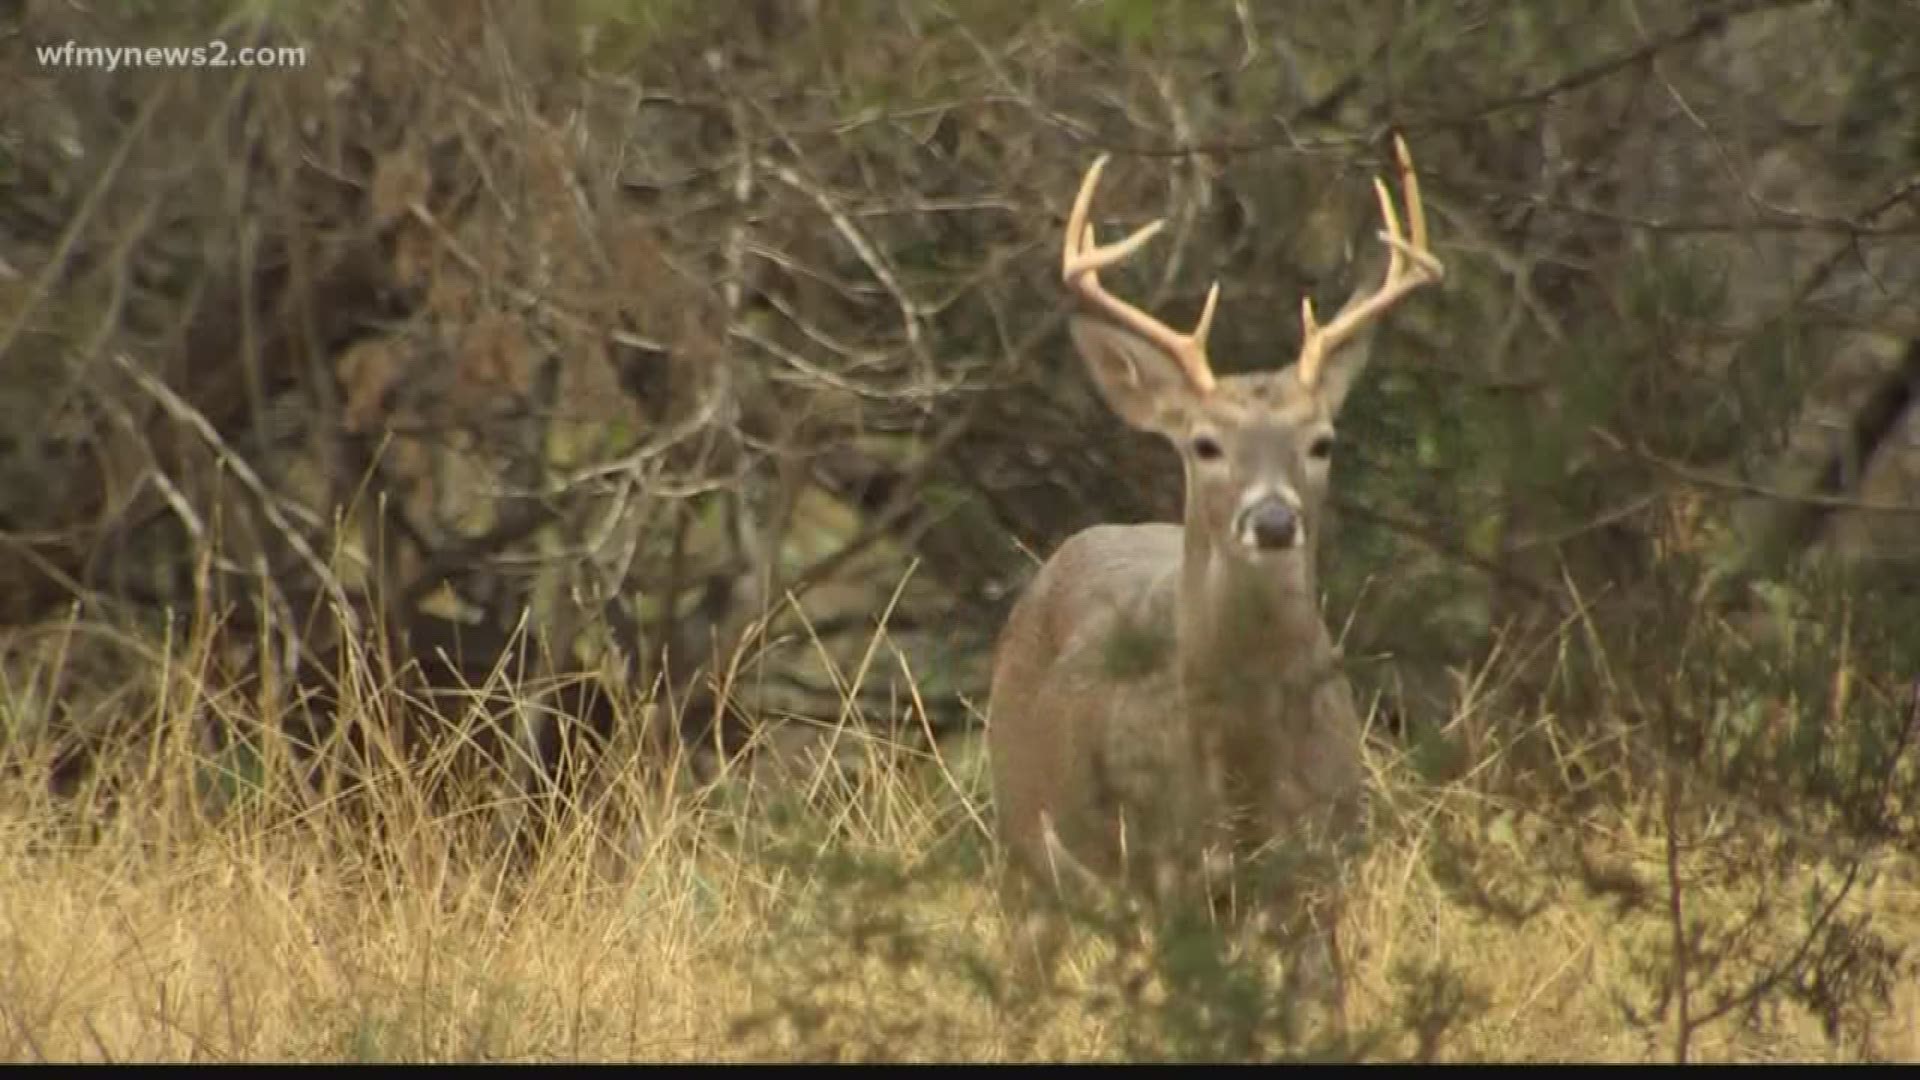 A new proposed bill has some residents concerned that you will soon see hunters on city streets